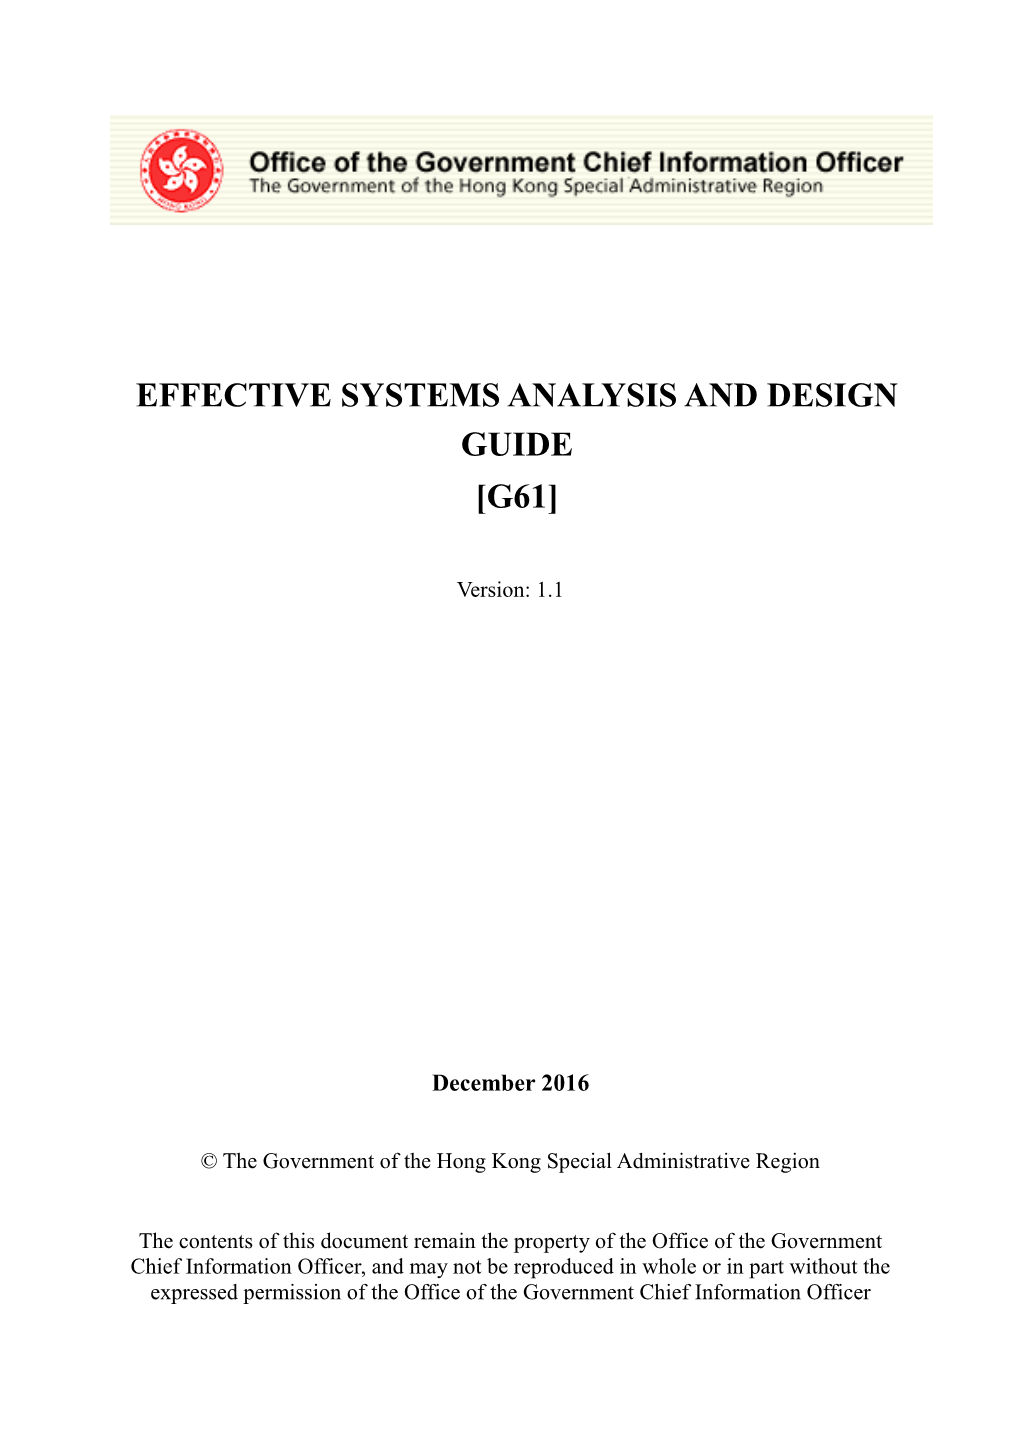 Effective Systems Analysis and Design Guide [G61]